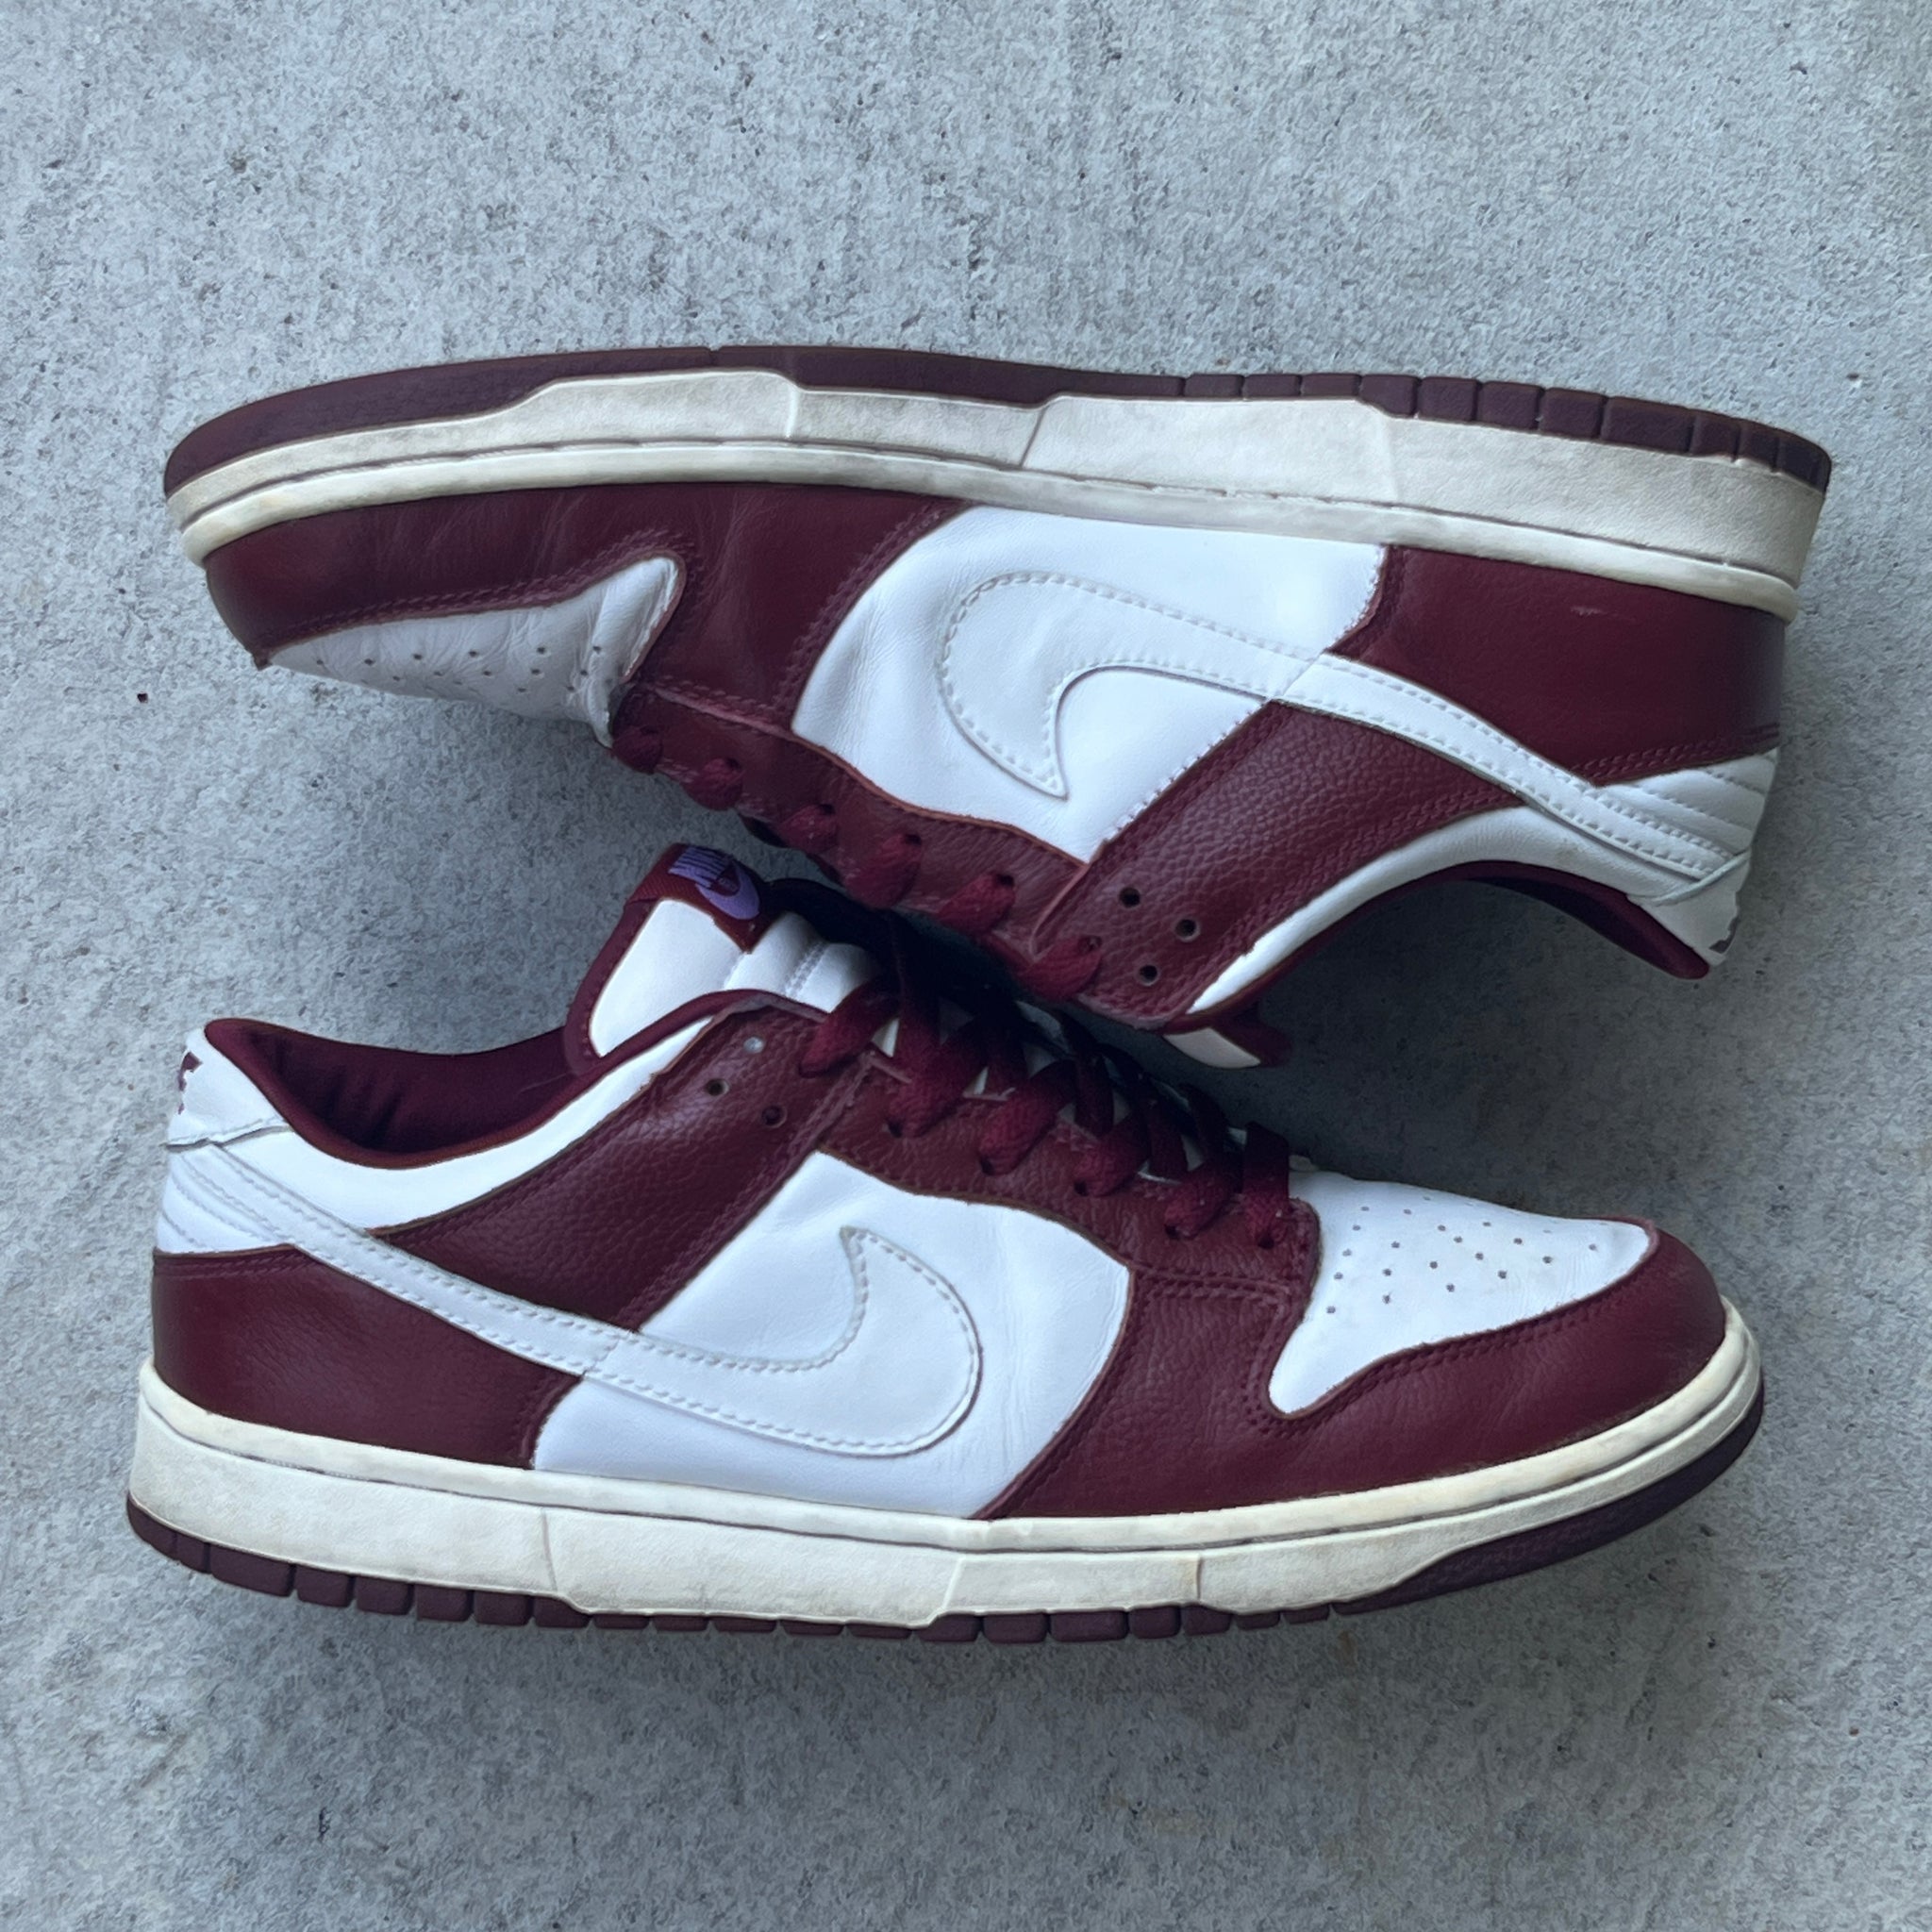 9.5 US - NIKE DUNK LOW TEAM RED W BOX 2003